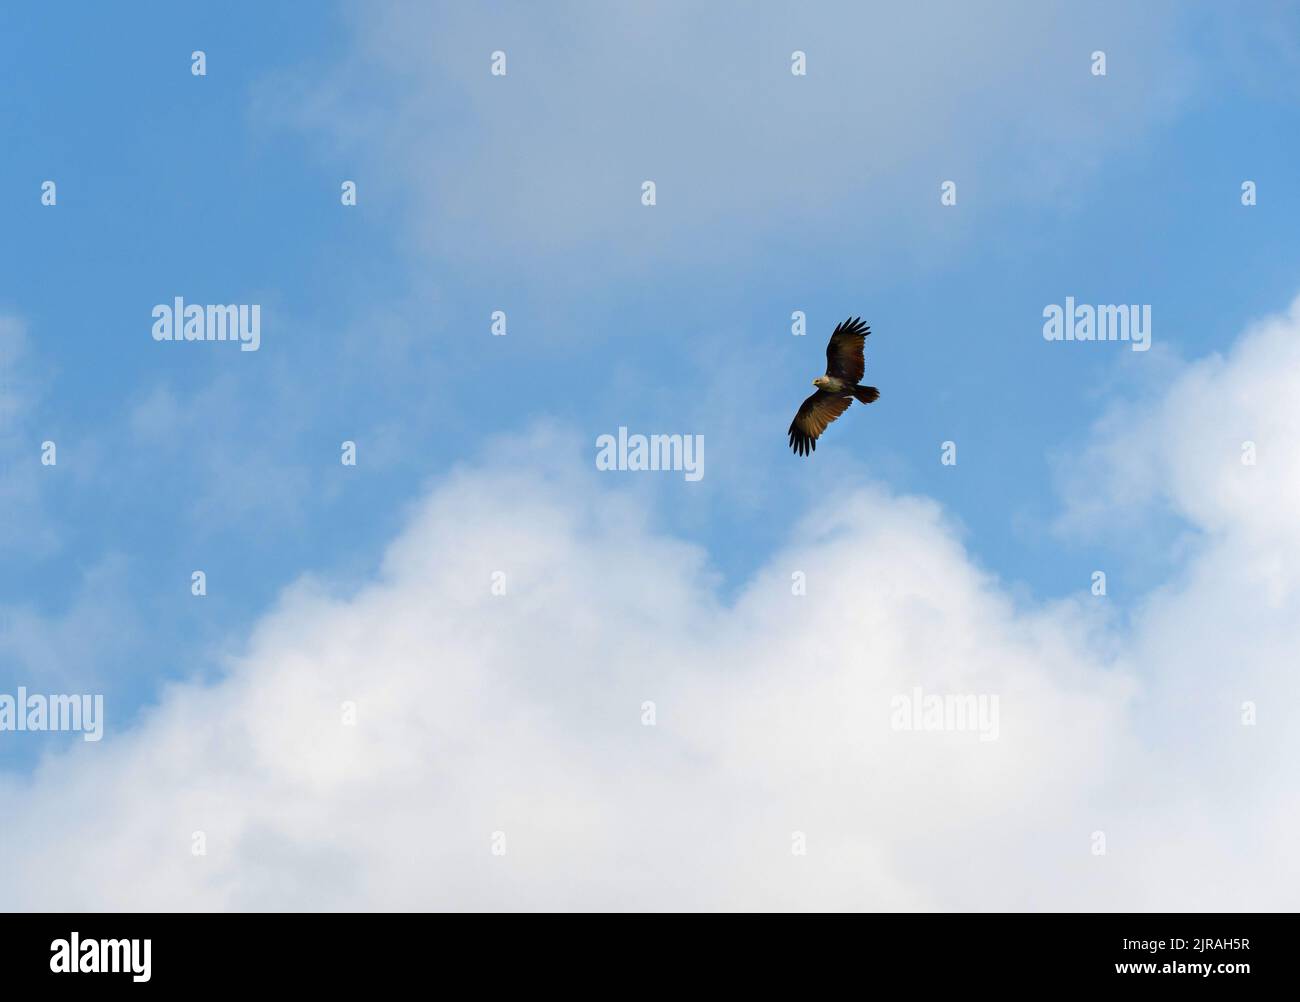 The falcon was flying freely in the sky. Stock Photo